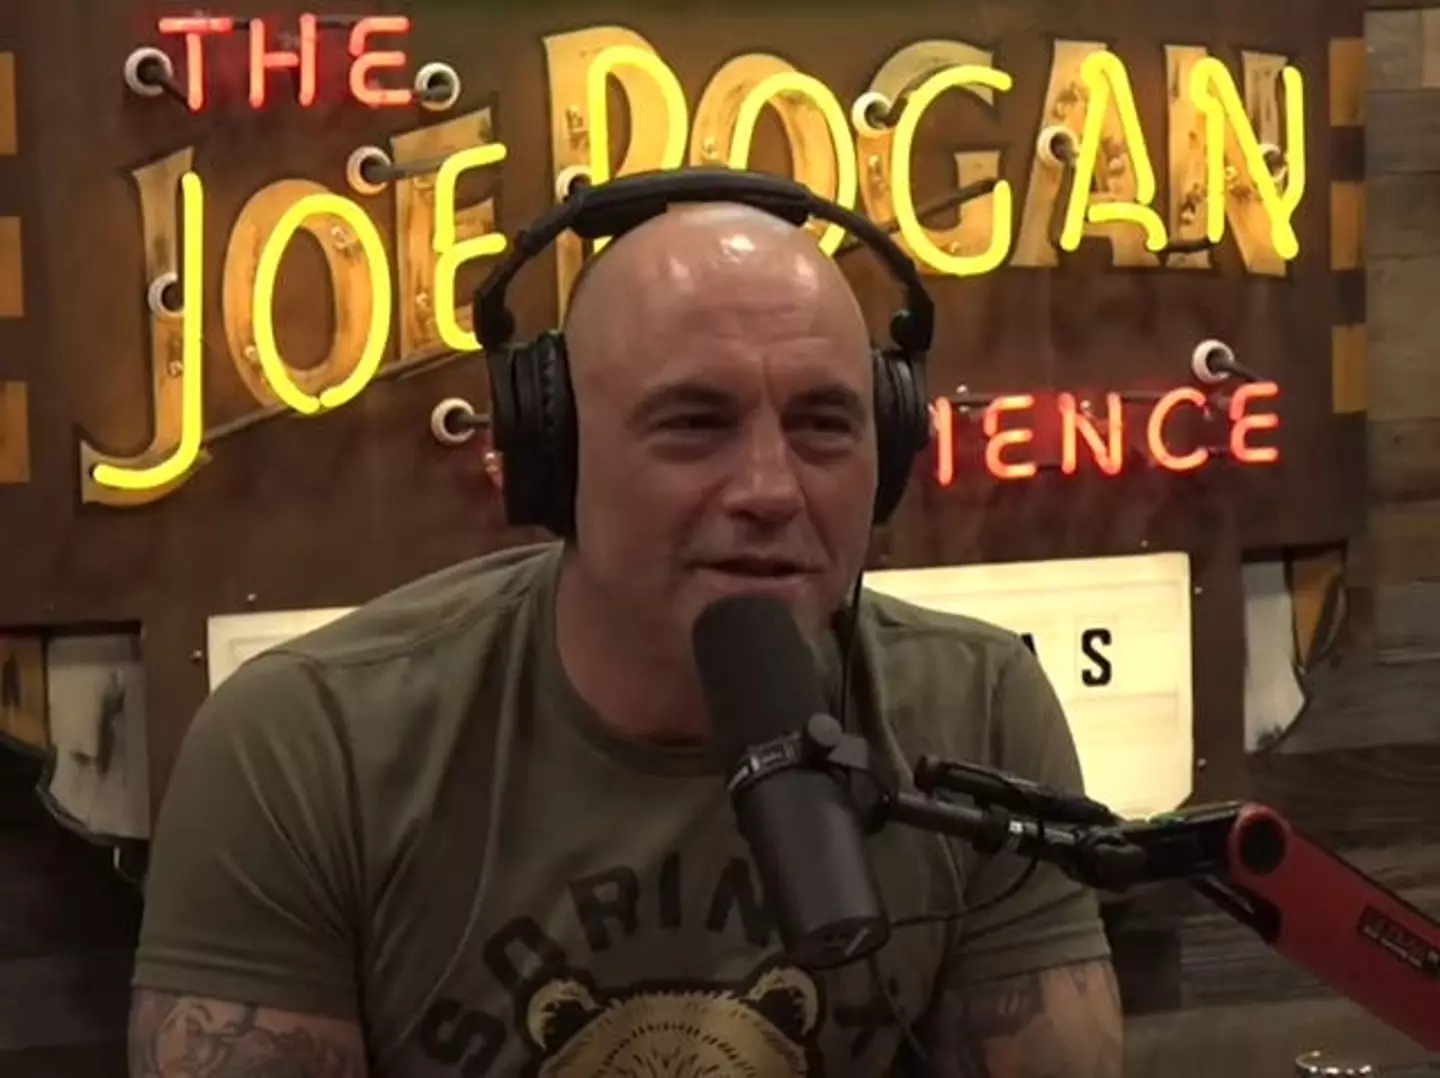 Rogan has been criticised about content on his podcast many times before.